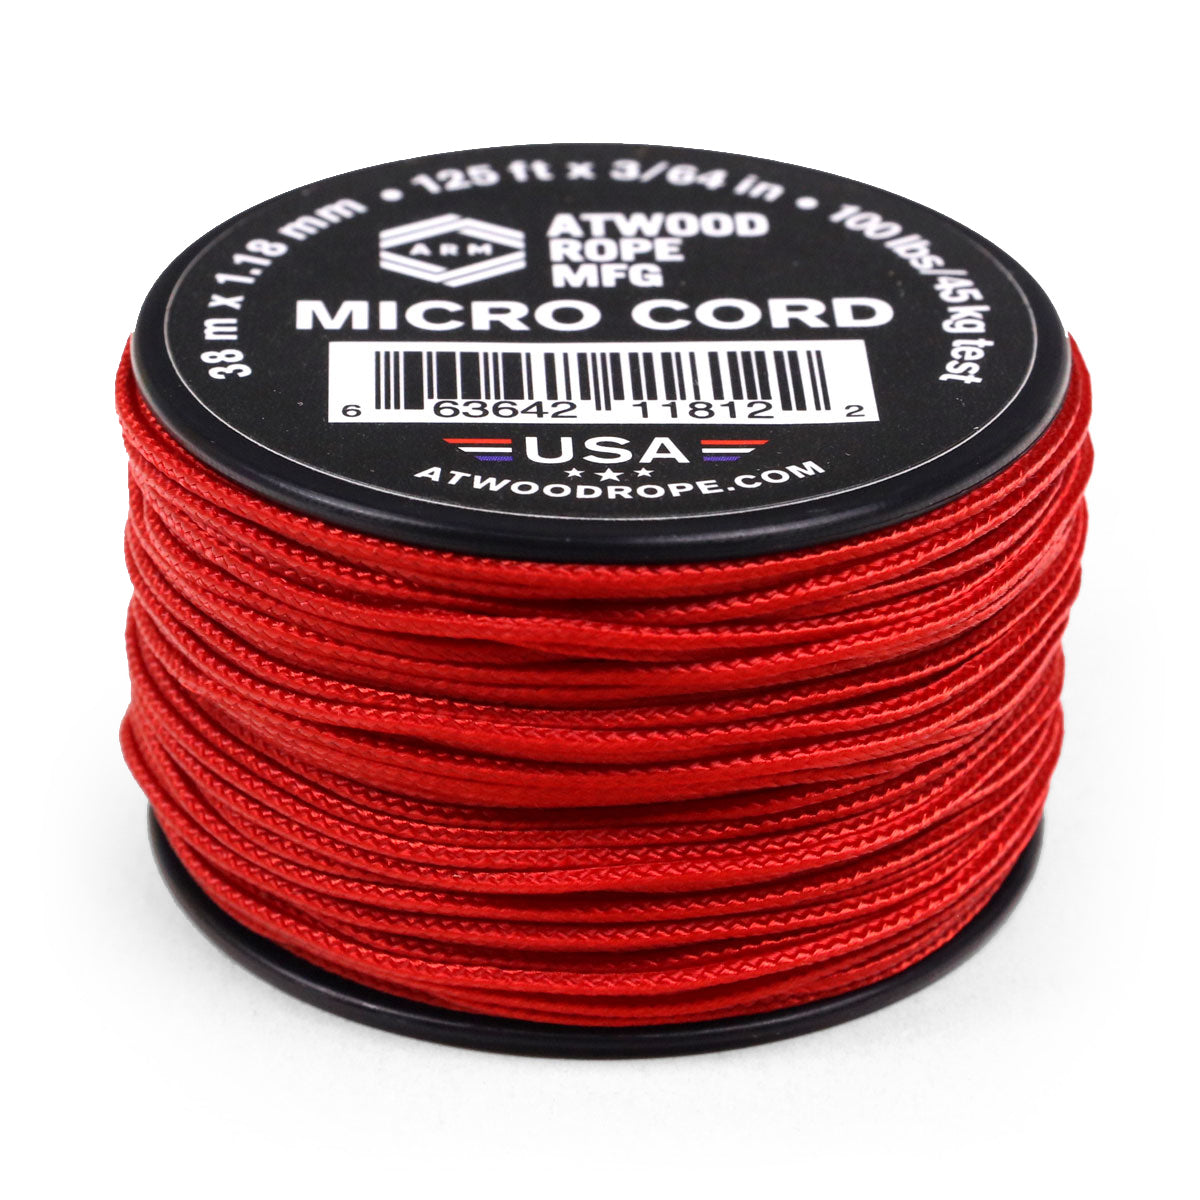 1.18mm Micro Cord - Red